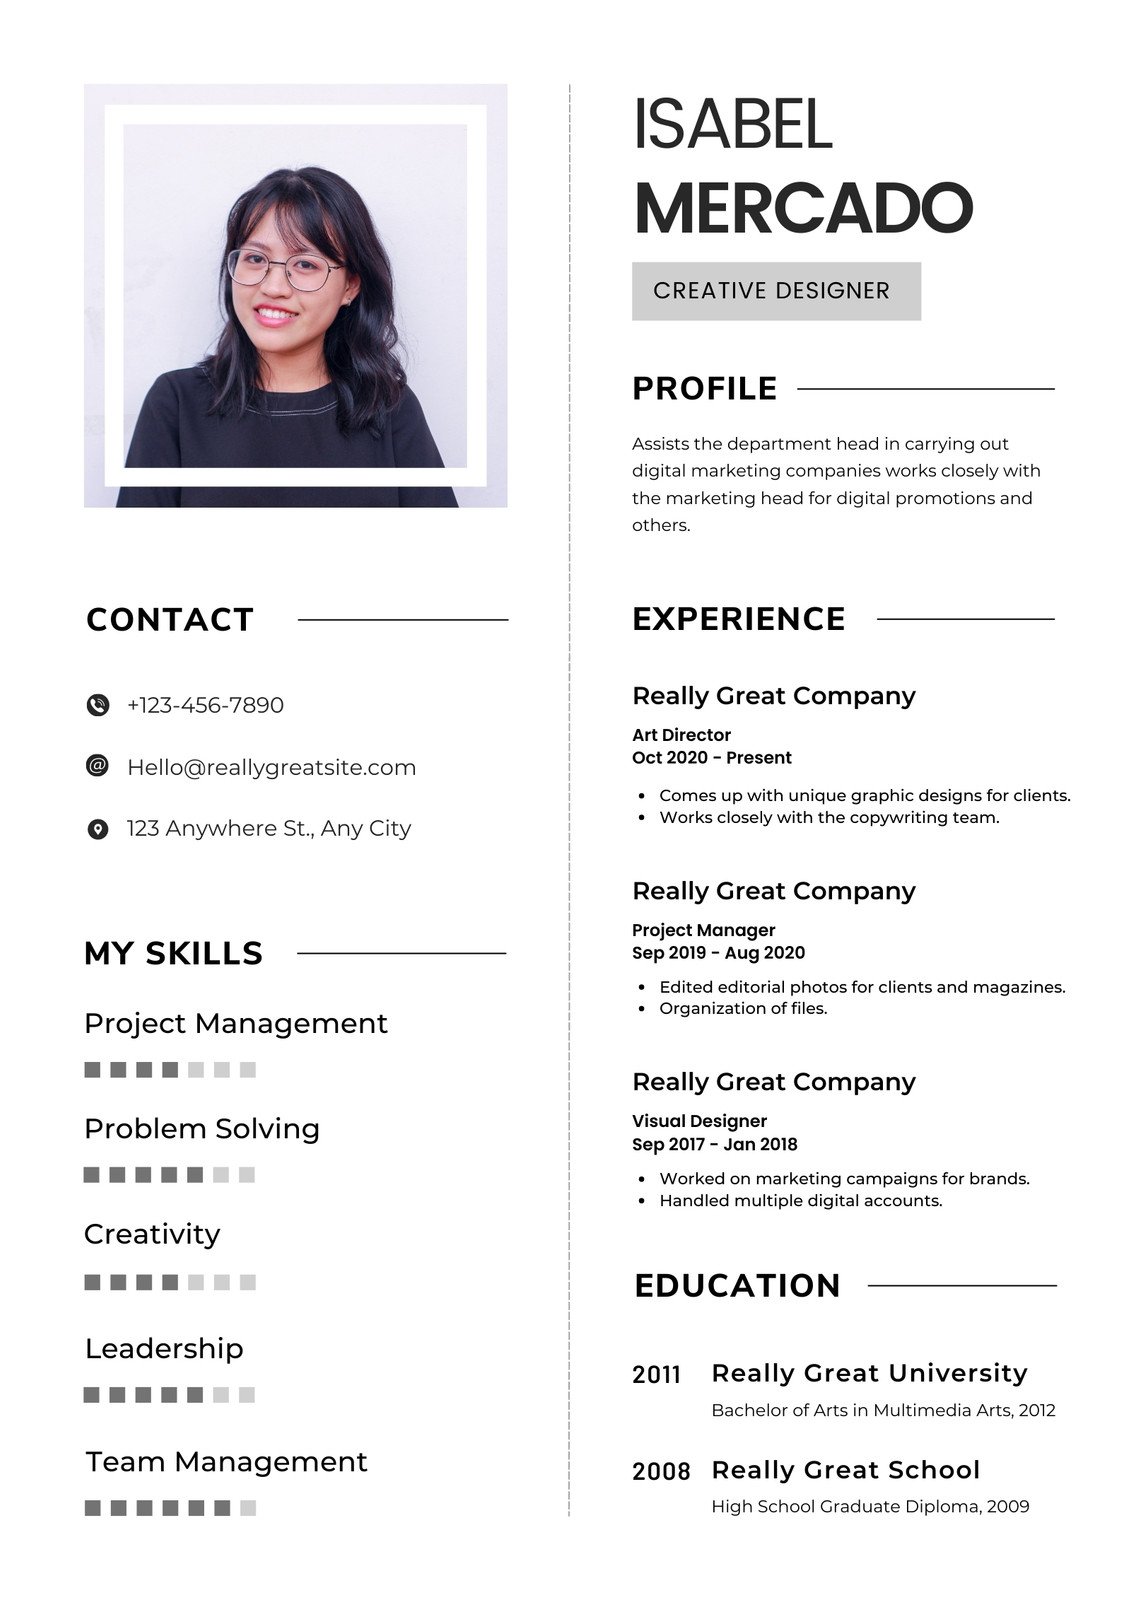 Should You Use Canva for Resumes?